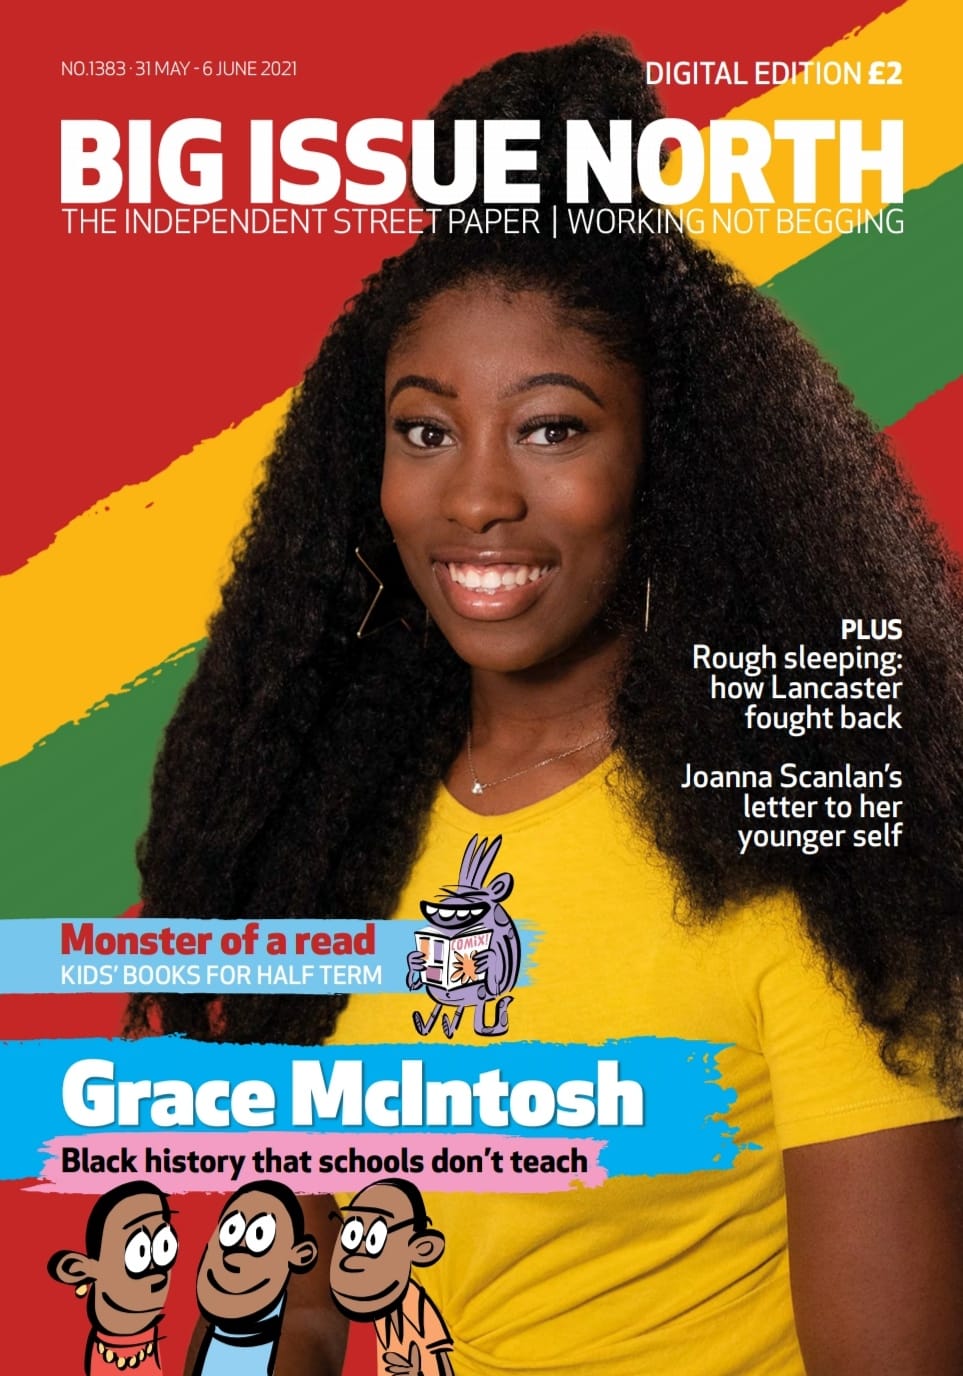 Grace McIntosh starred on the front cover of the Big Issue magazine